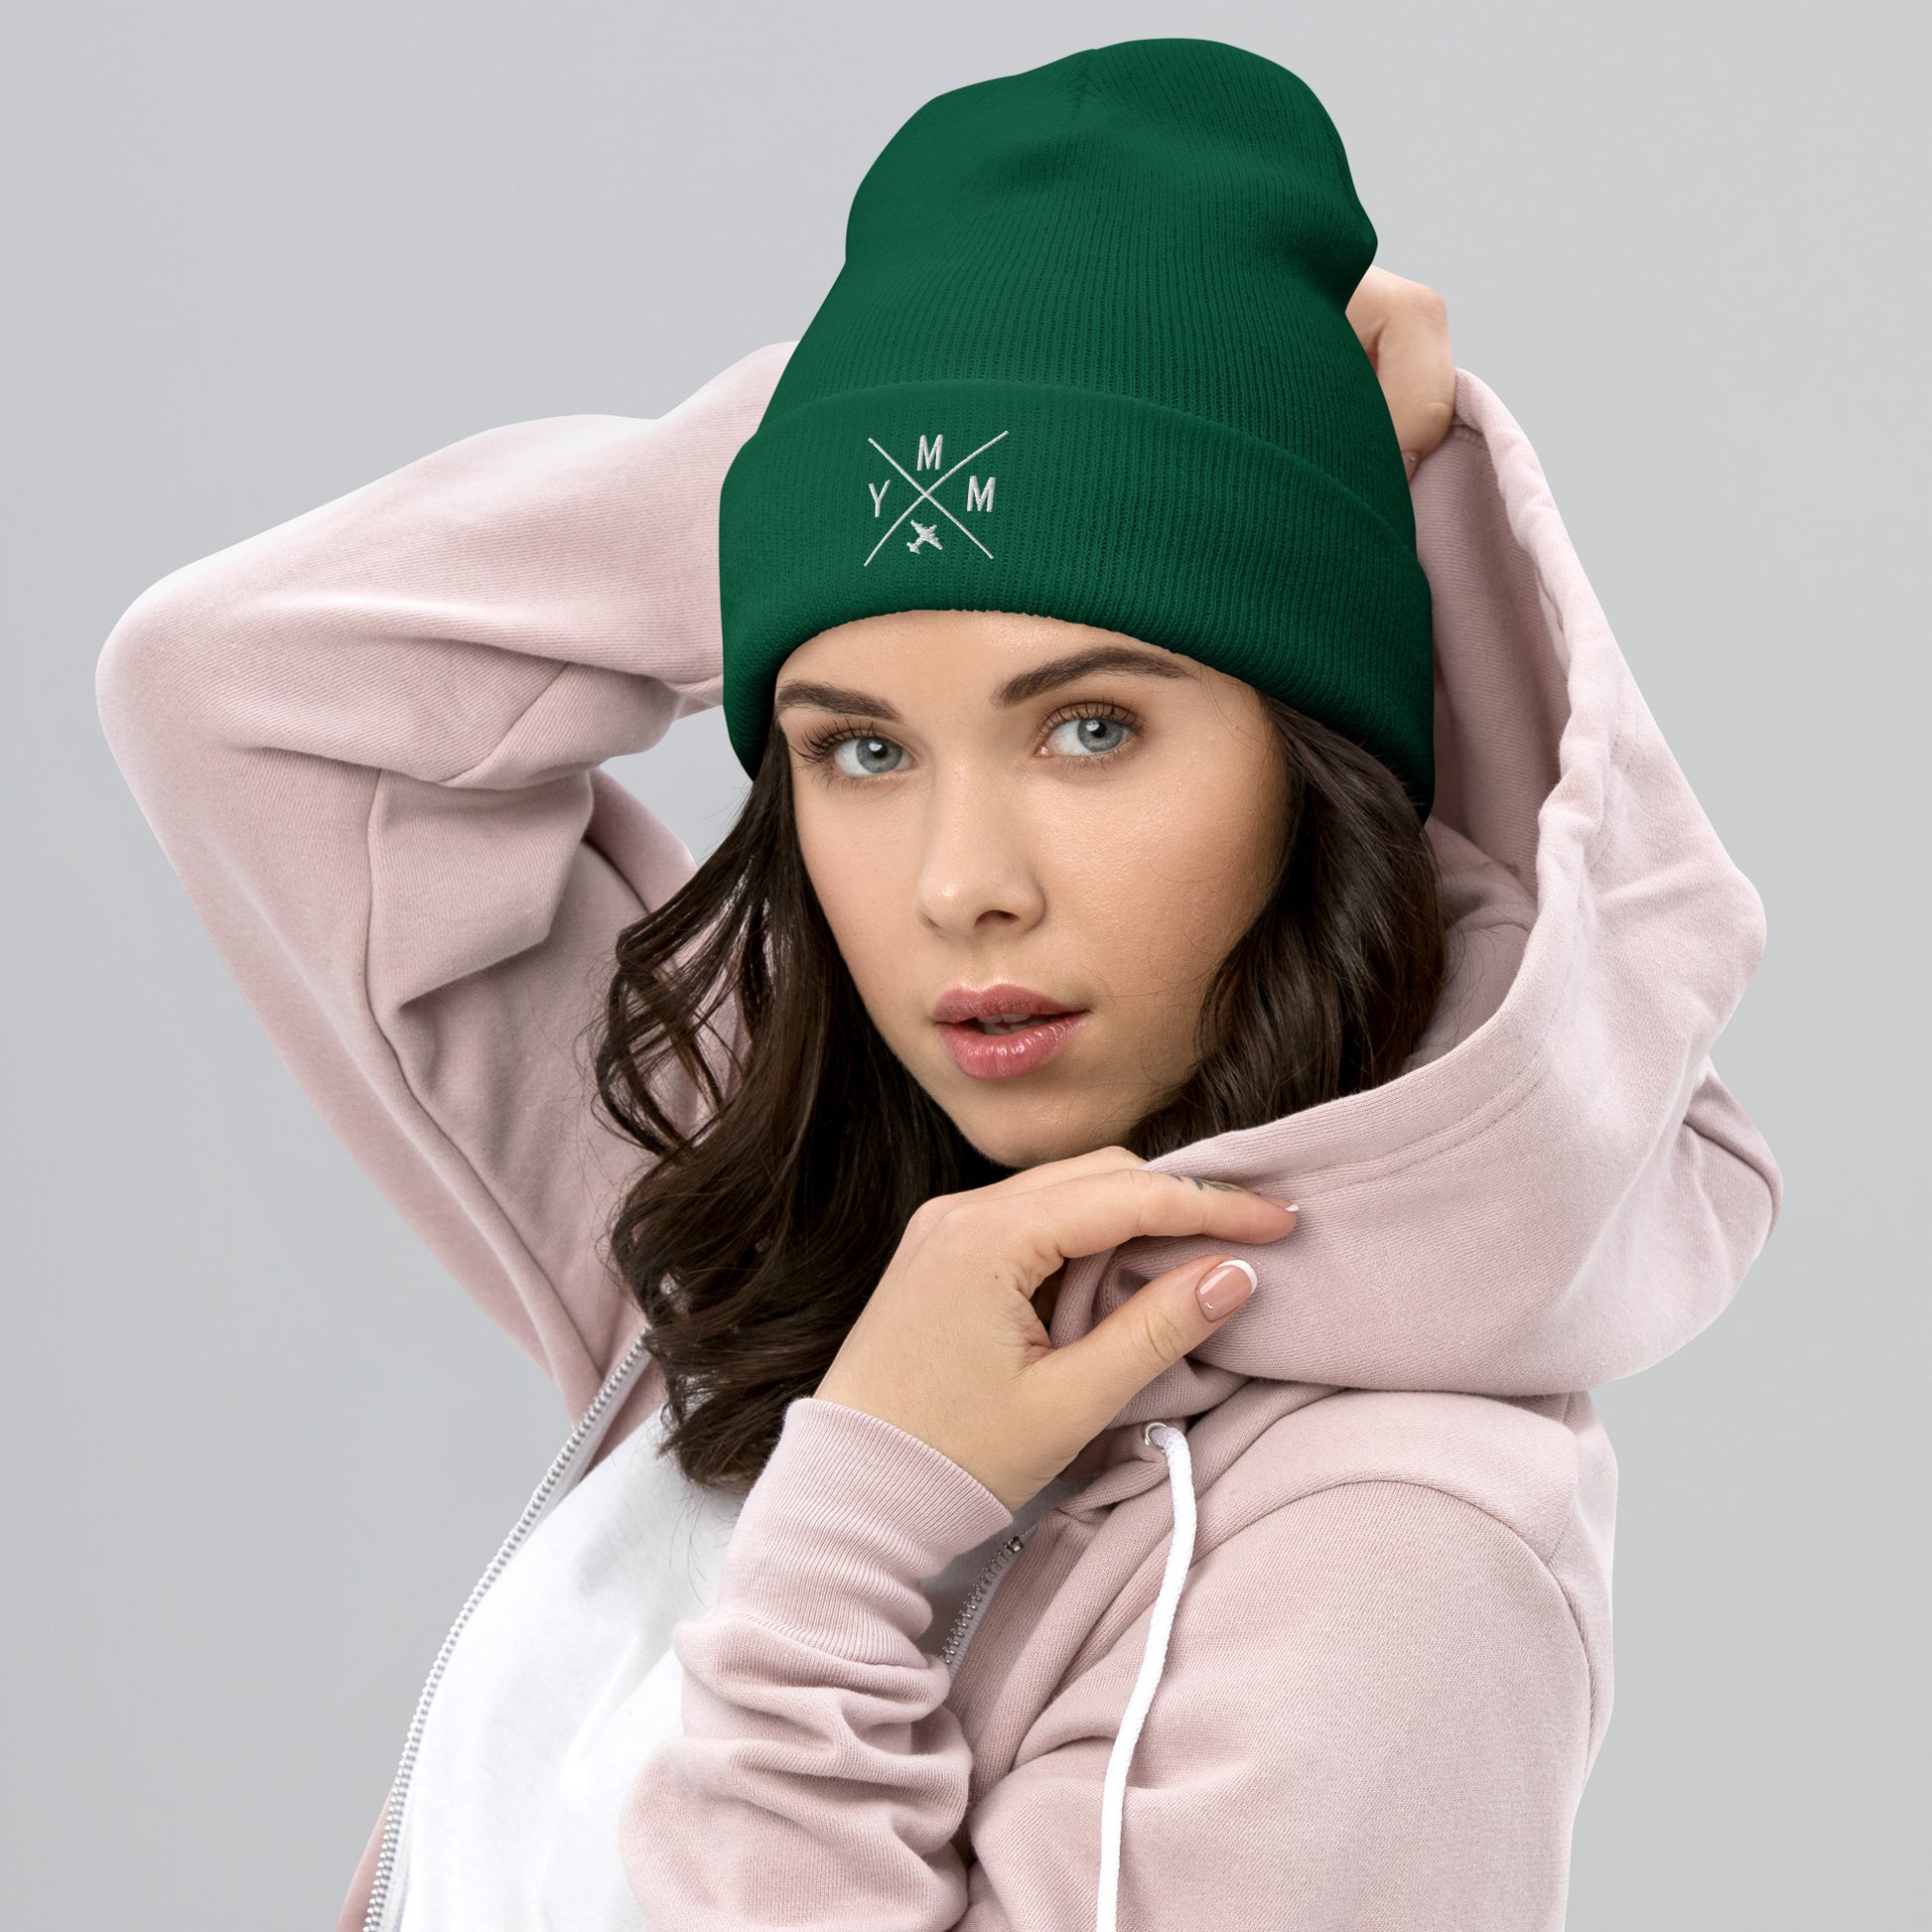 Crossed-X Cuffed Beanie - White • YMM Fort McMurray • YHM Designs - Image 05